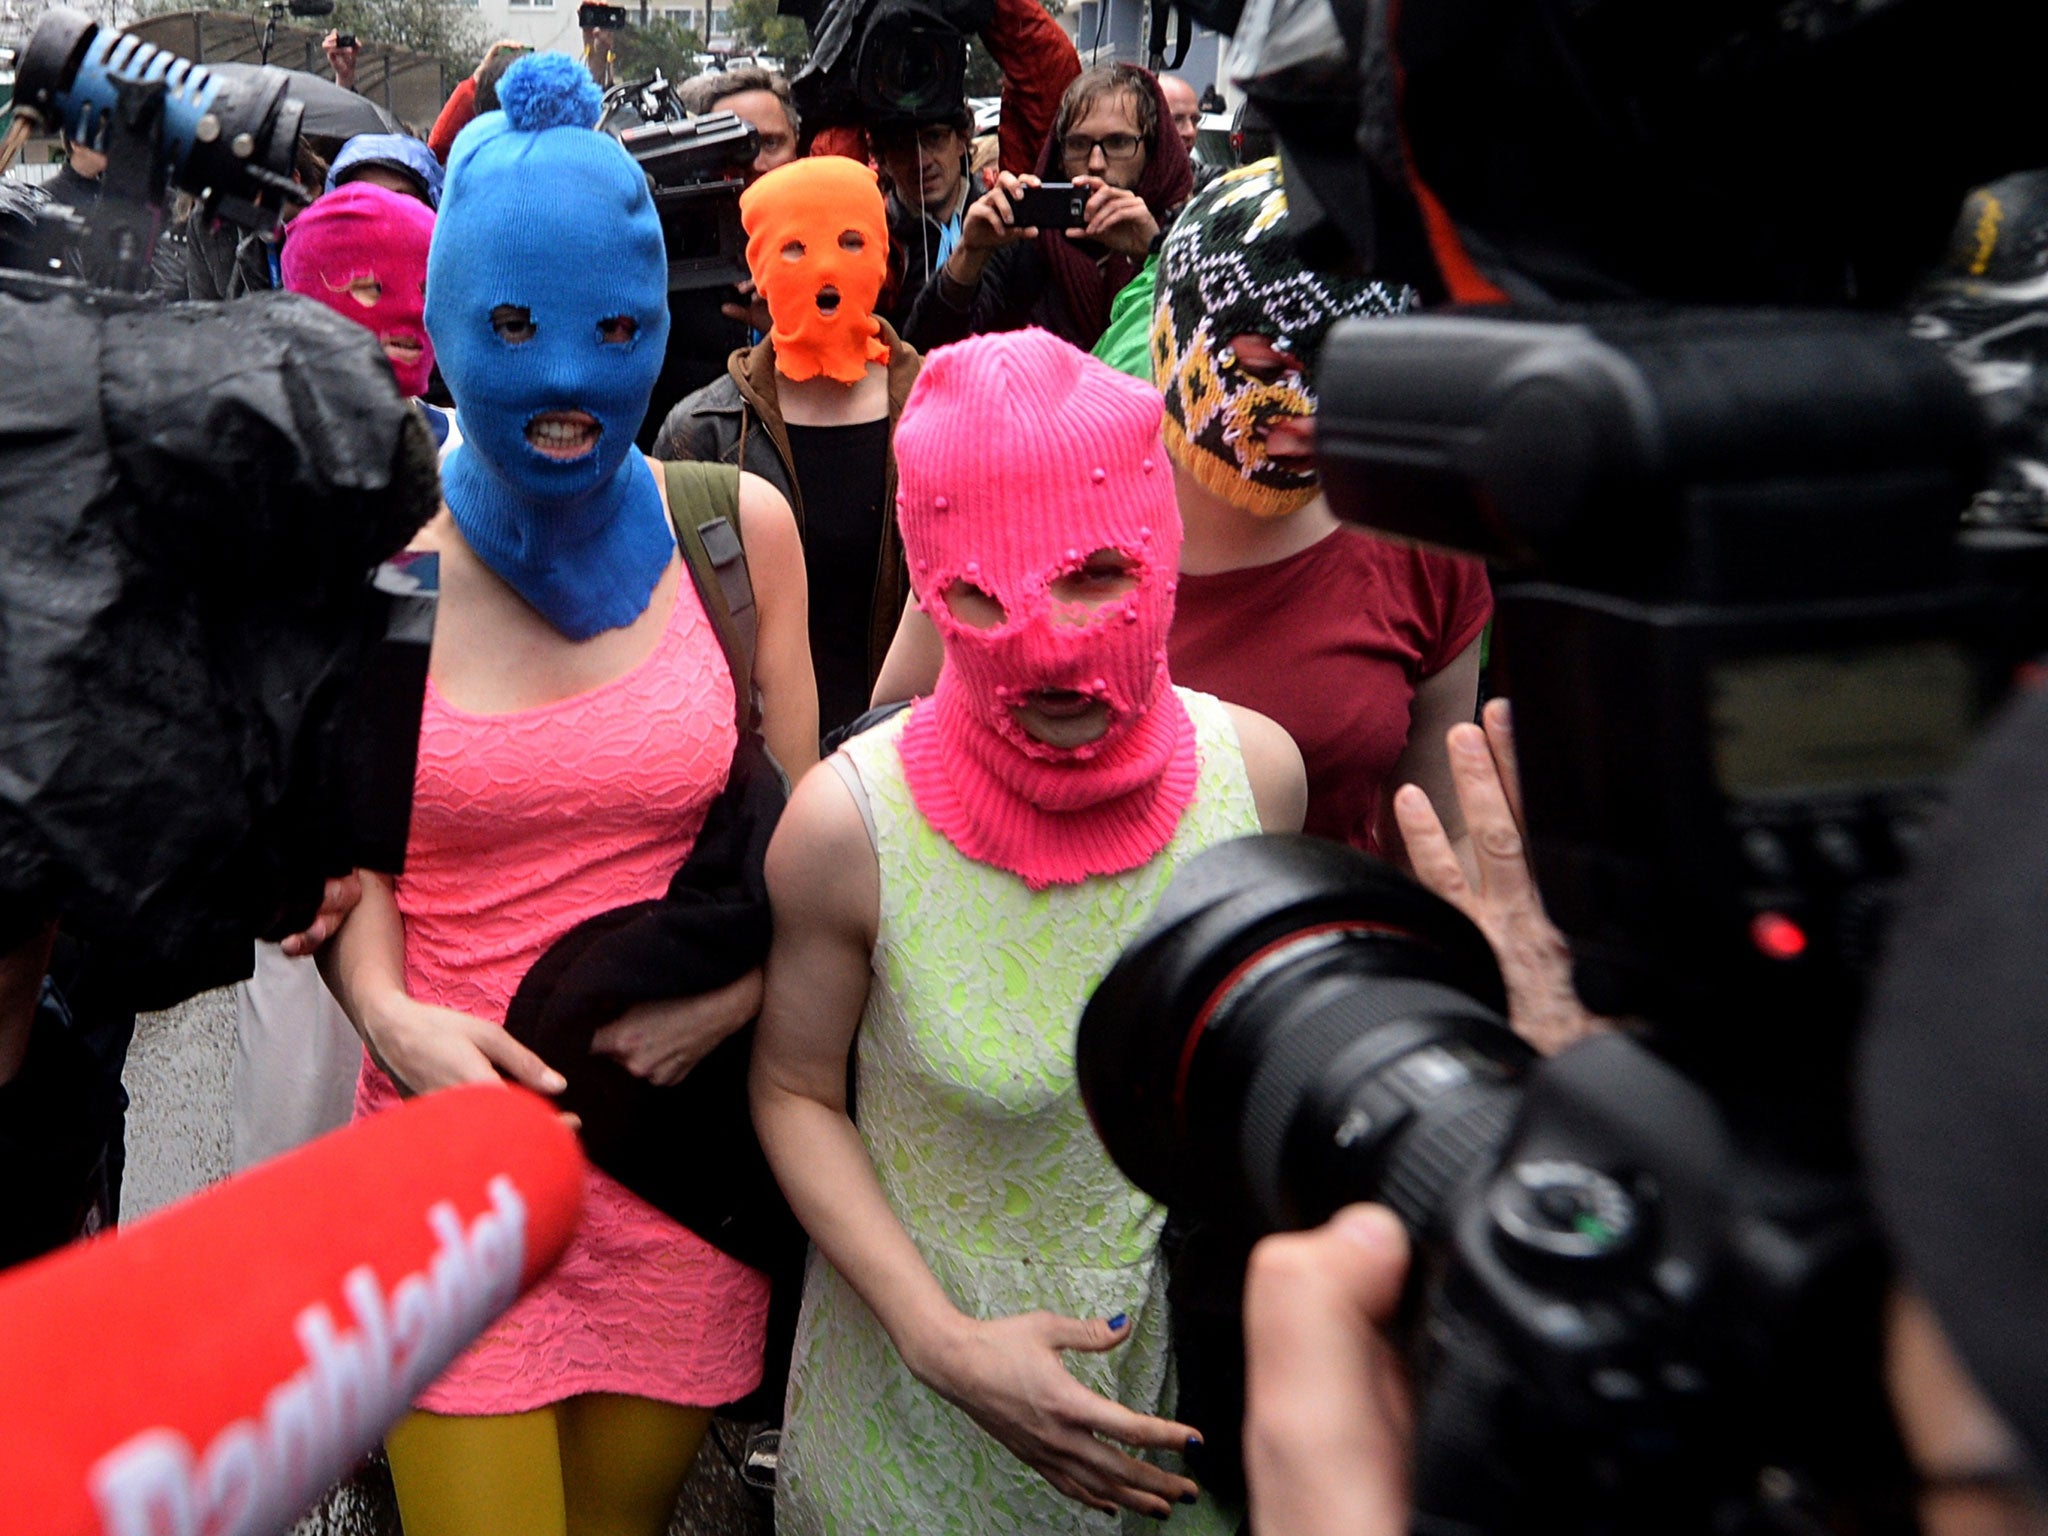 Wearing masks members of Russian punk group Pussy Riot, Nadezhda Tolokonnikova (L) and Maria Alyokhina (R) speak to journalists while leaving the police station of Adler, near Sochi, on February 18, 2014